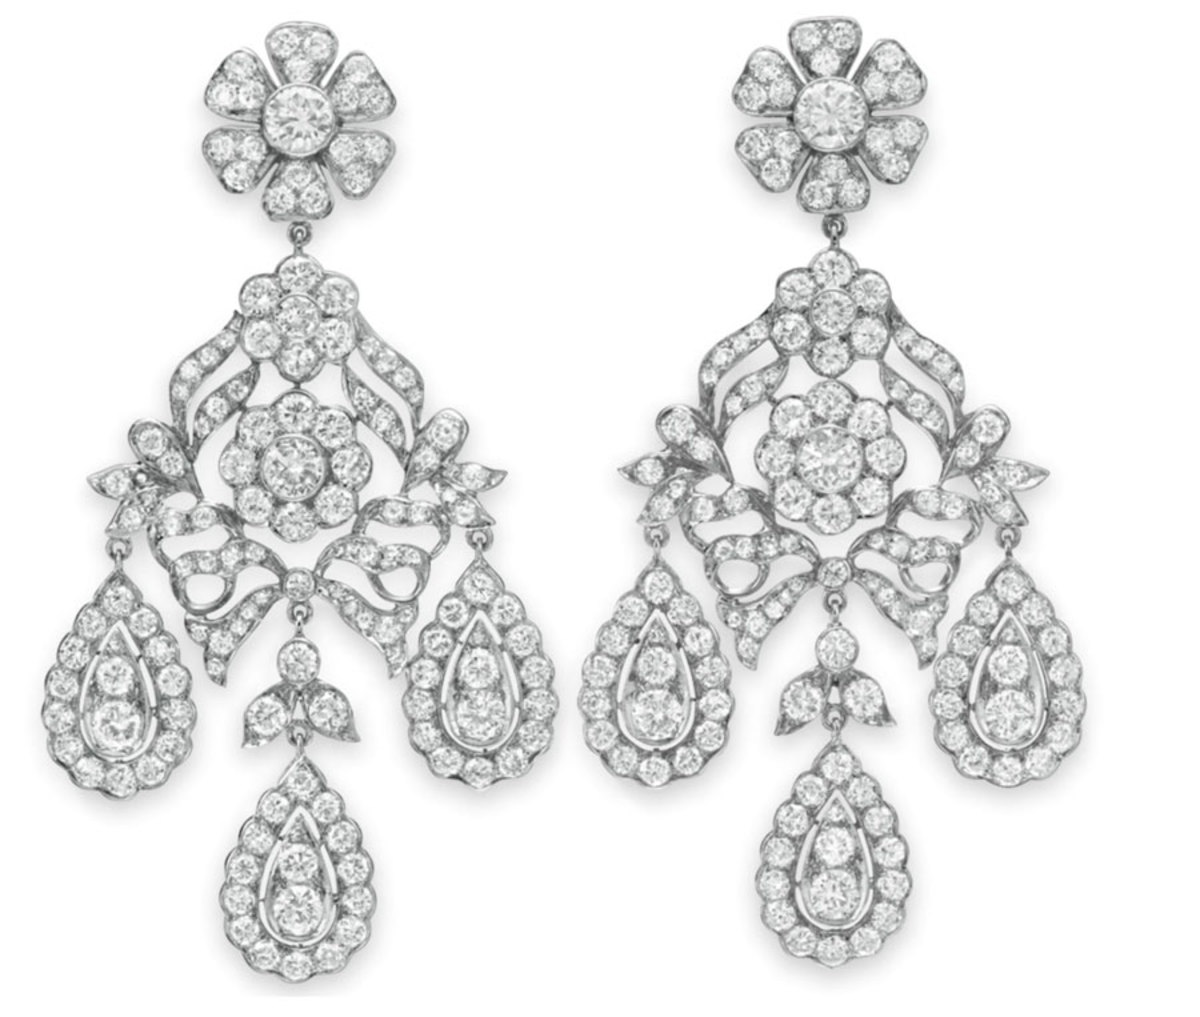 The diamond ear pendants gifted by Mike Todd sold at Christie's for $374,500.